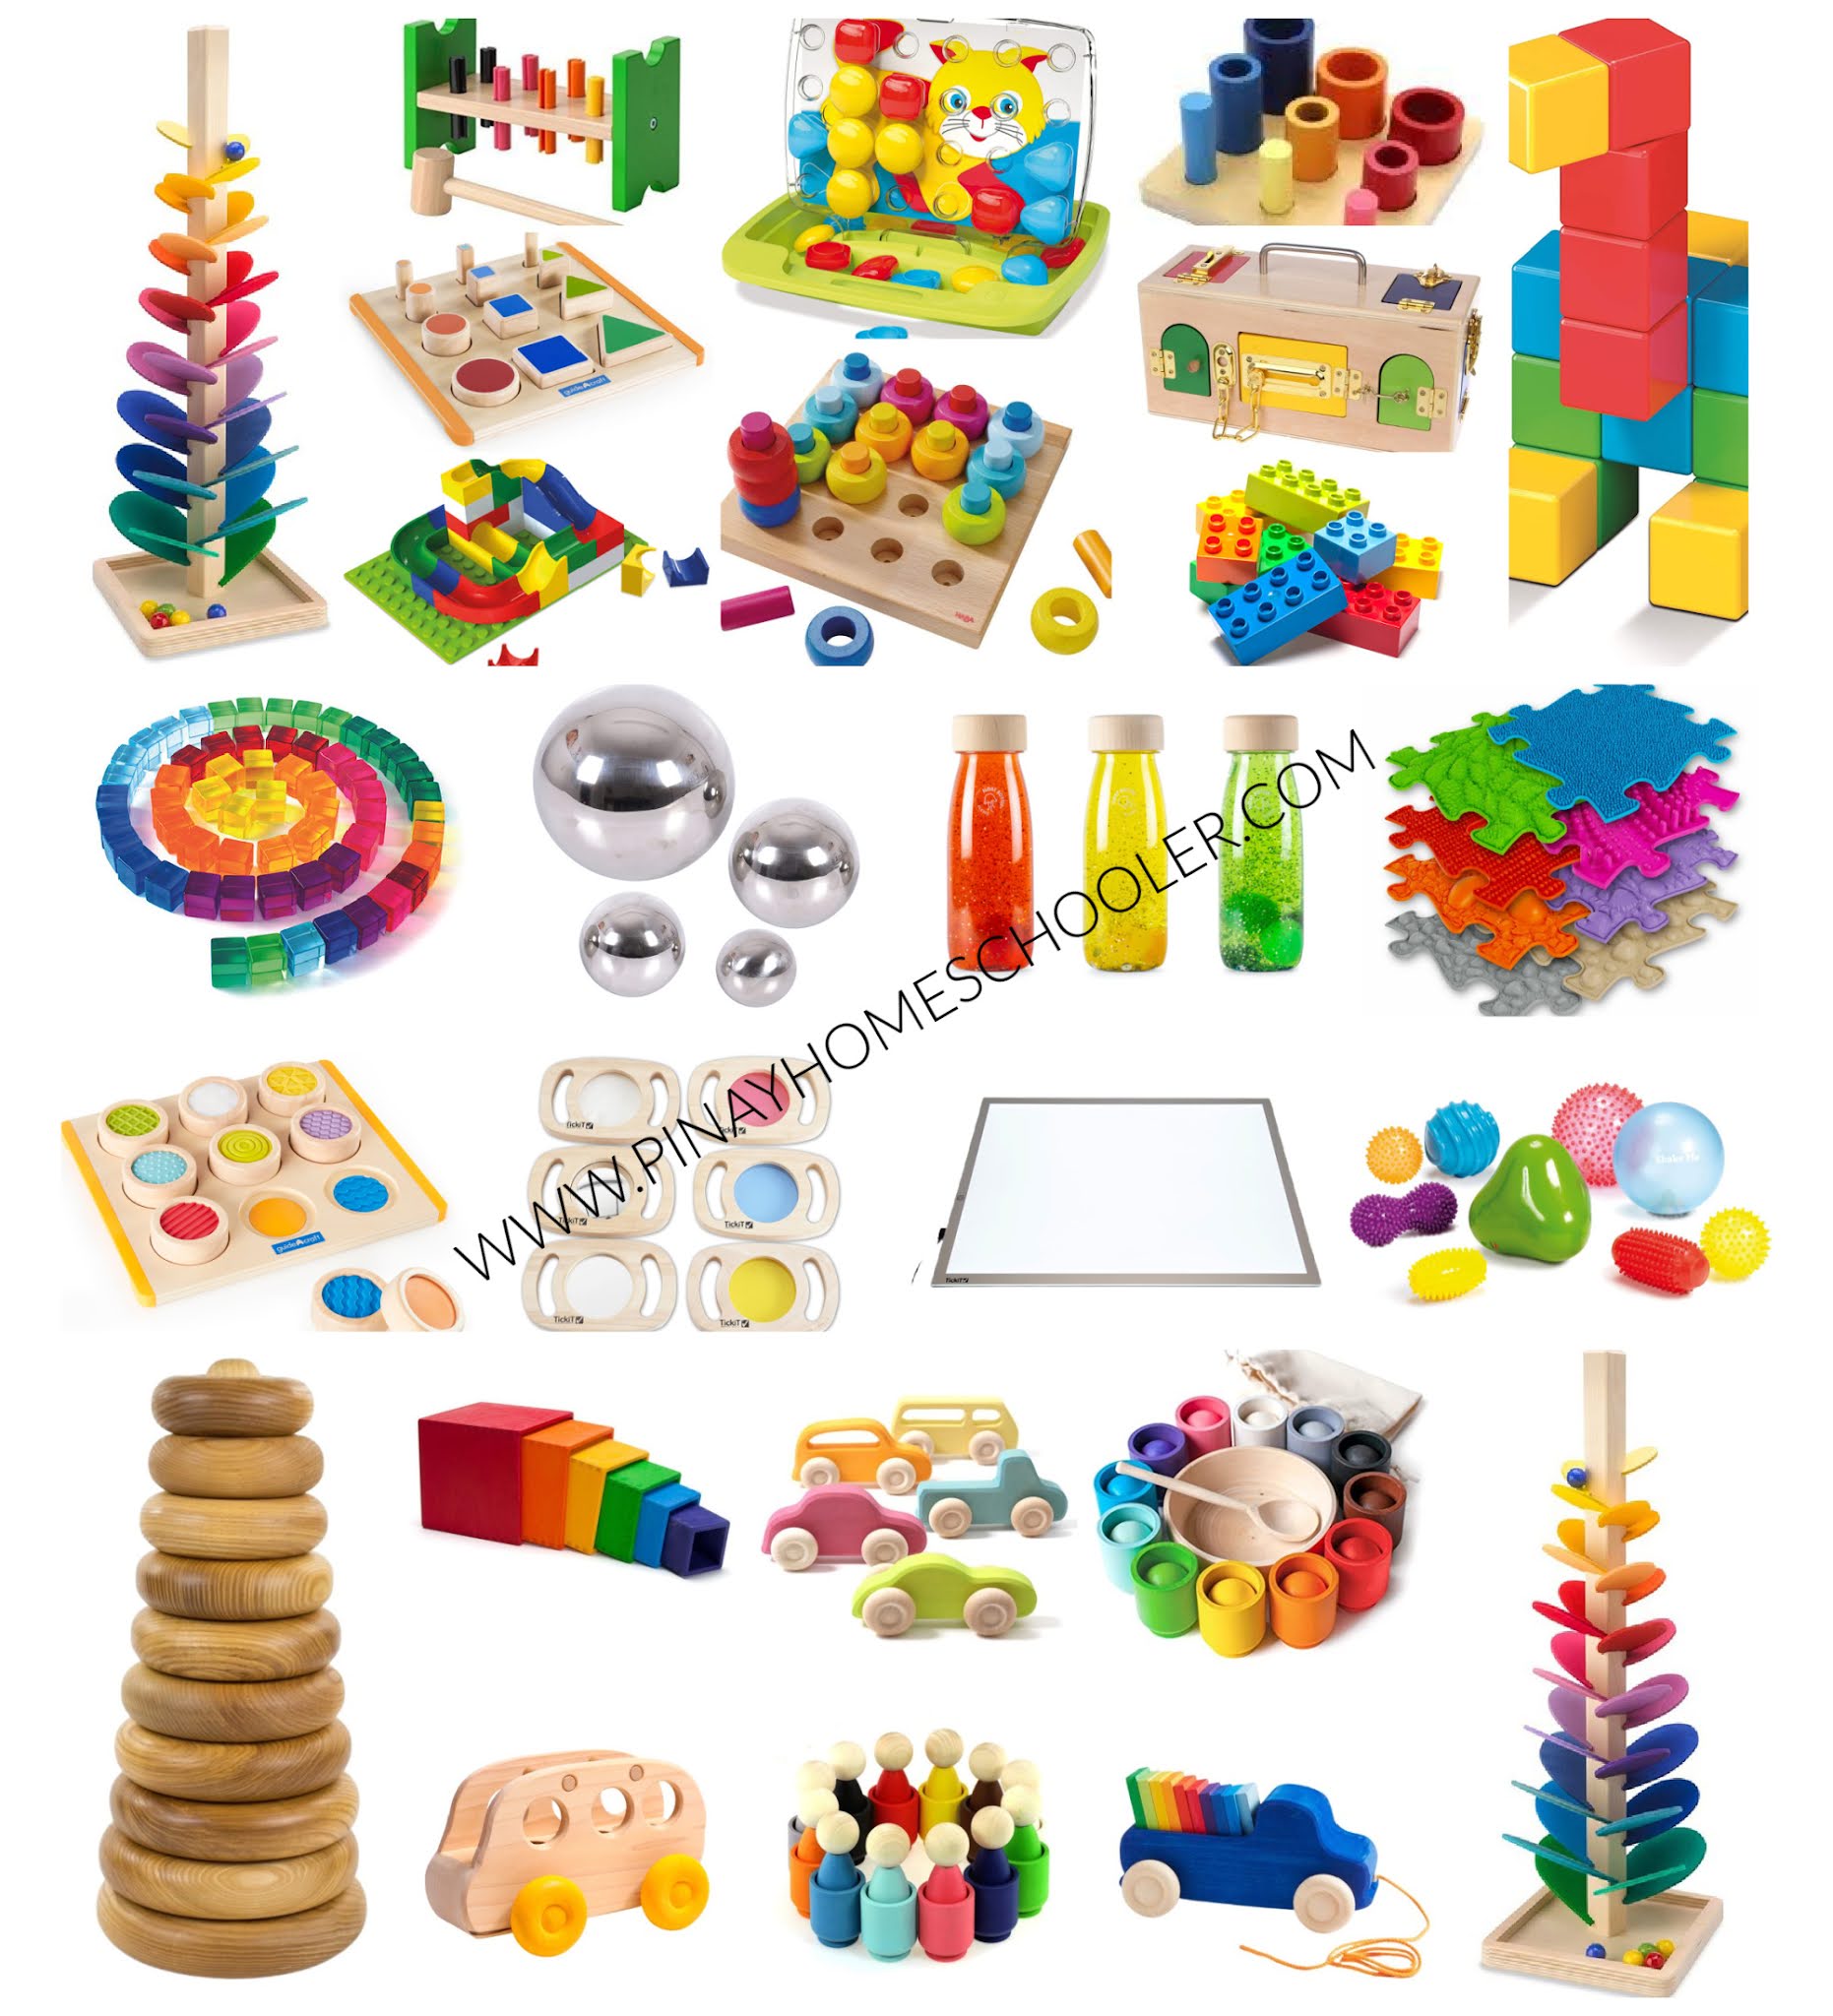 educational-wooden-toys-for-3-year-olds-online-discount-save-40